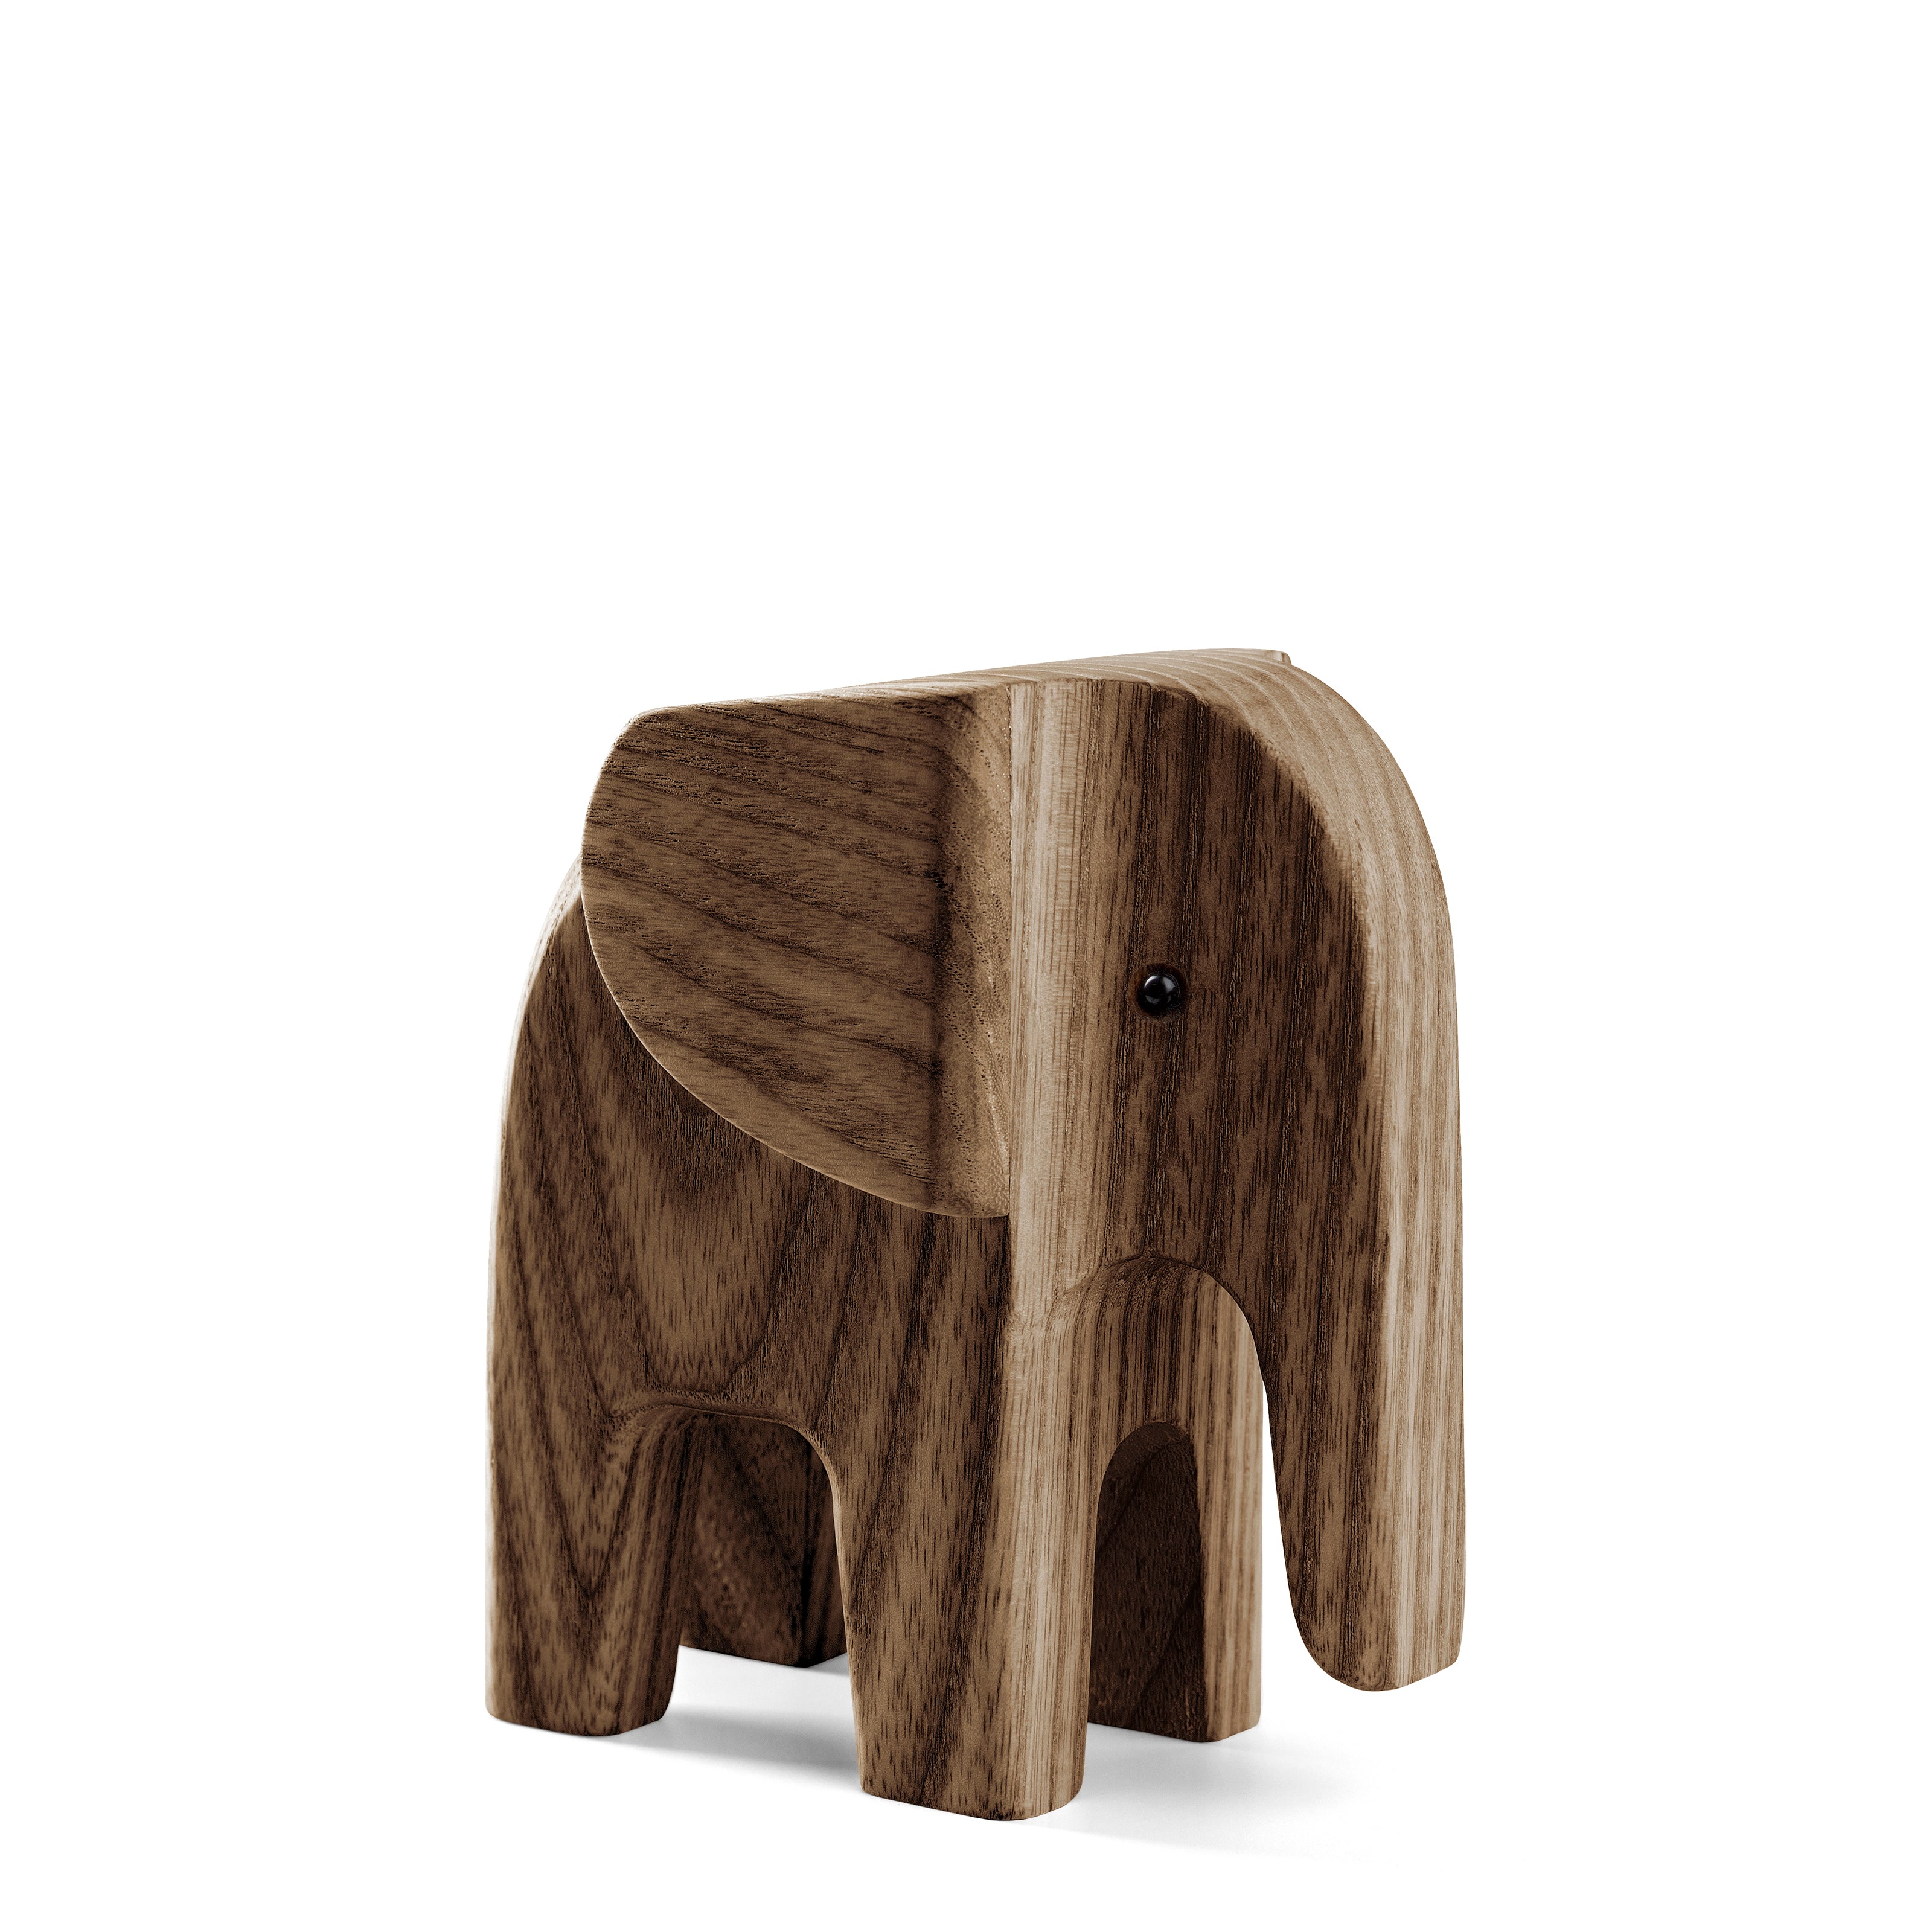 BABY ELEPHANT smoke stained ash